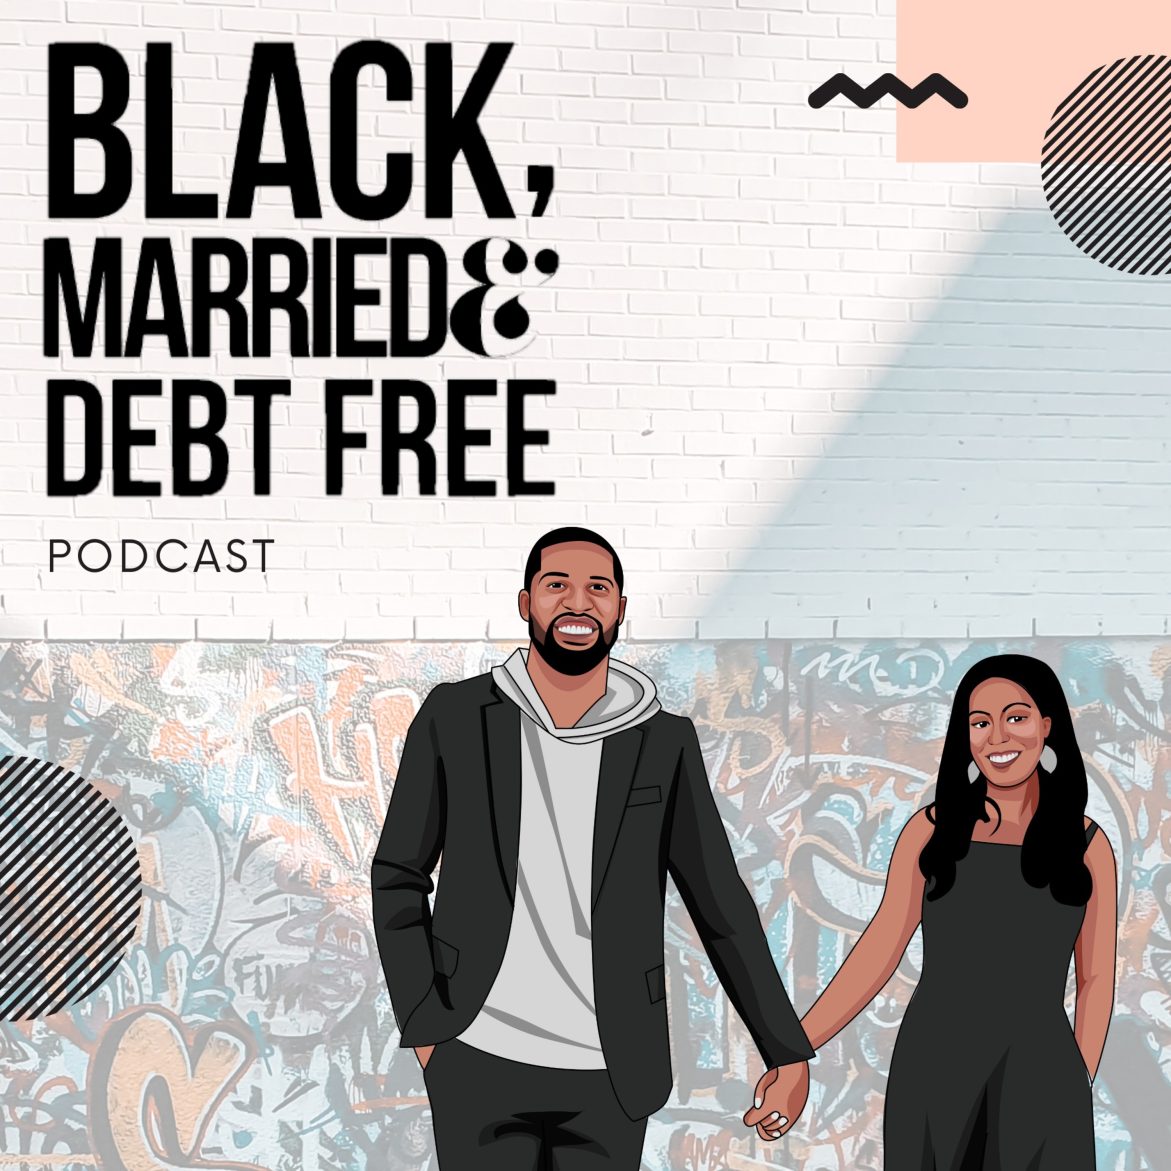 Black Podcasting - (EP - 322 NO MUSIC) IS INFLATION ON ITS WAY BACK? HOW THAT AFFECTS THE MARKET 😲 WHY ARE PLANES FALLING OUT OF THE SKY? ✈️